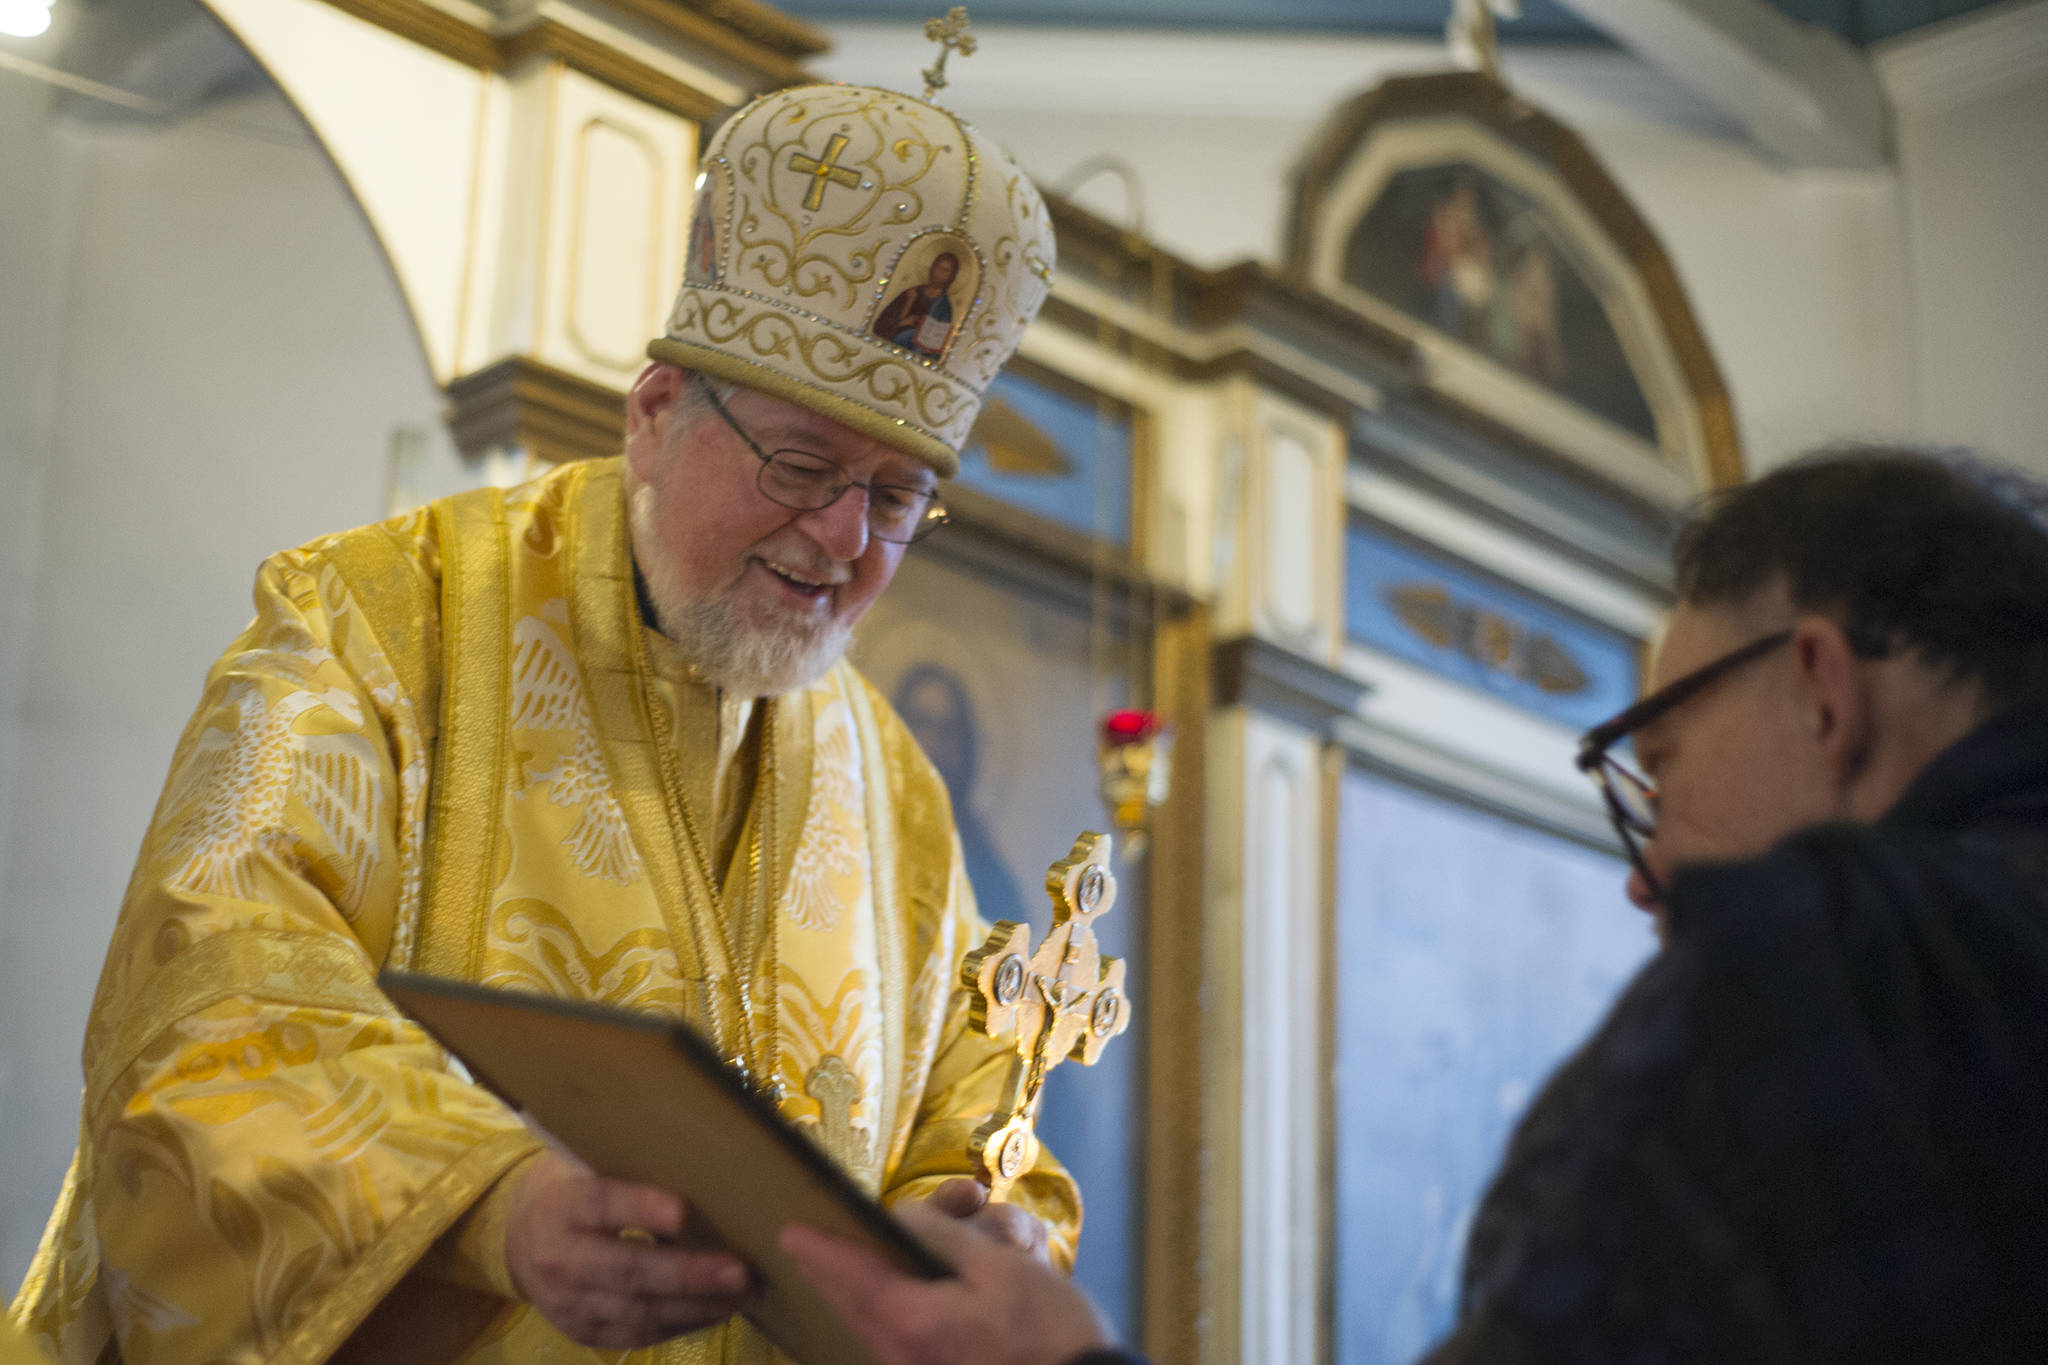 Bishop David, leader of the Russian Orthodox Church’s Diocese of Alaska, presents a certificate of appreciation to Patrick Kearney at the end of Divine Liturgy at St. Nicholas Russian Orthodox Chruch on Sunday, Nov. 25, 2015. (Nolin Ainsworth | Juneau Empire)